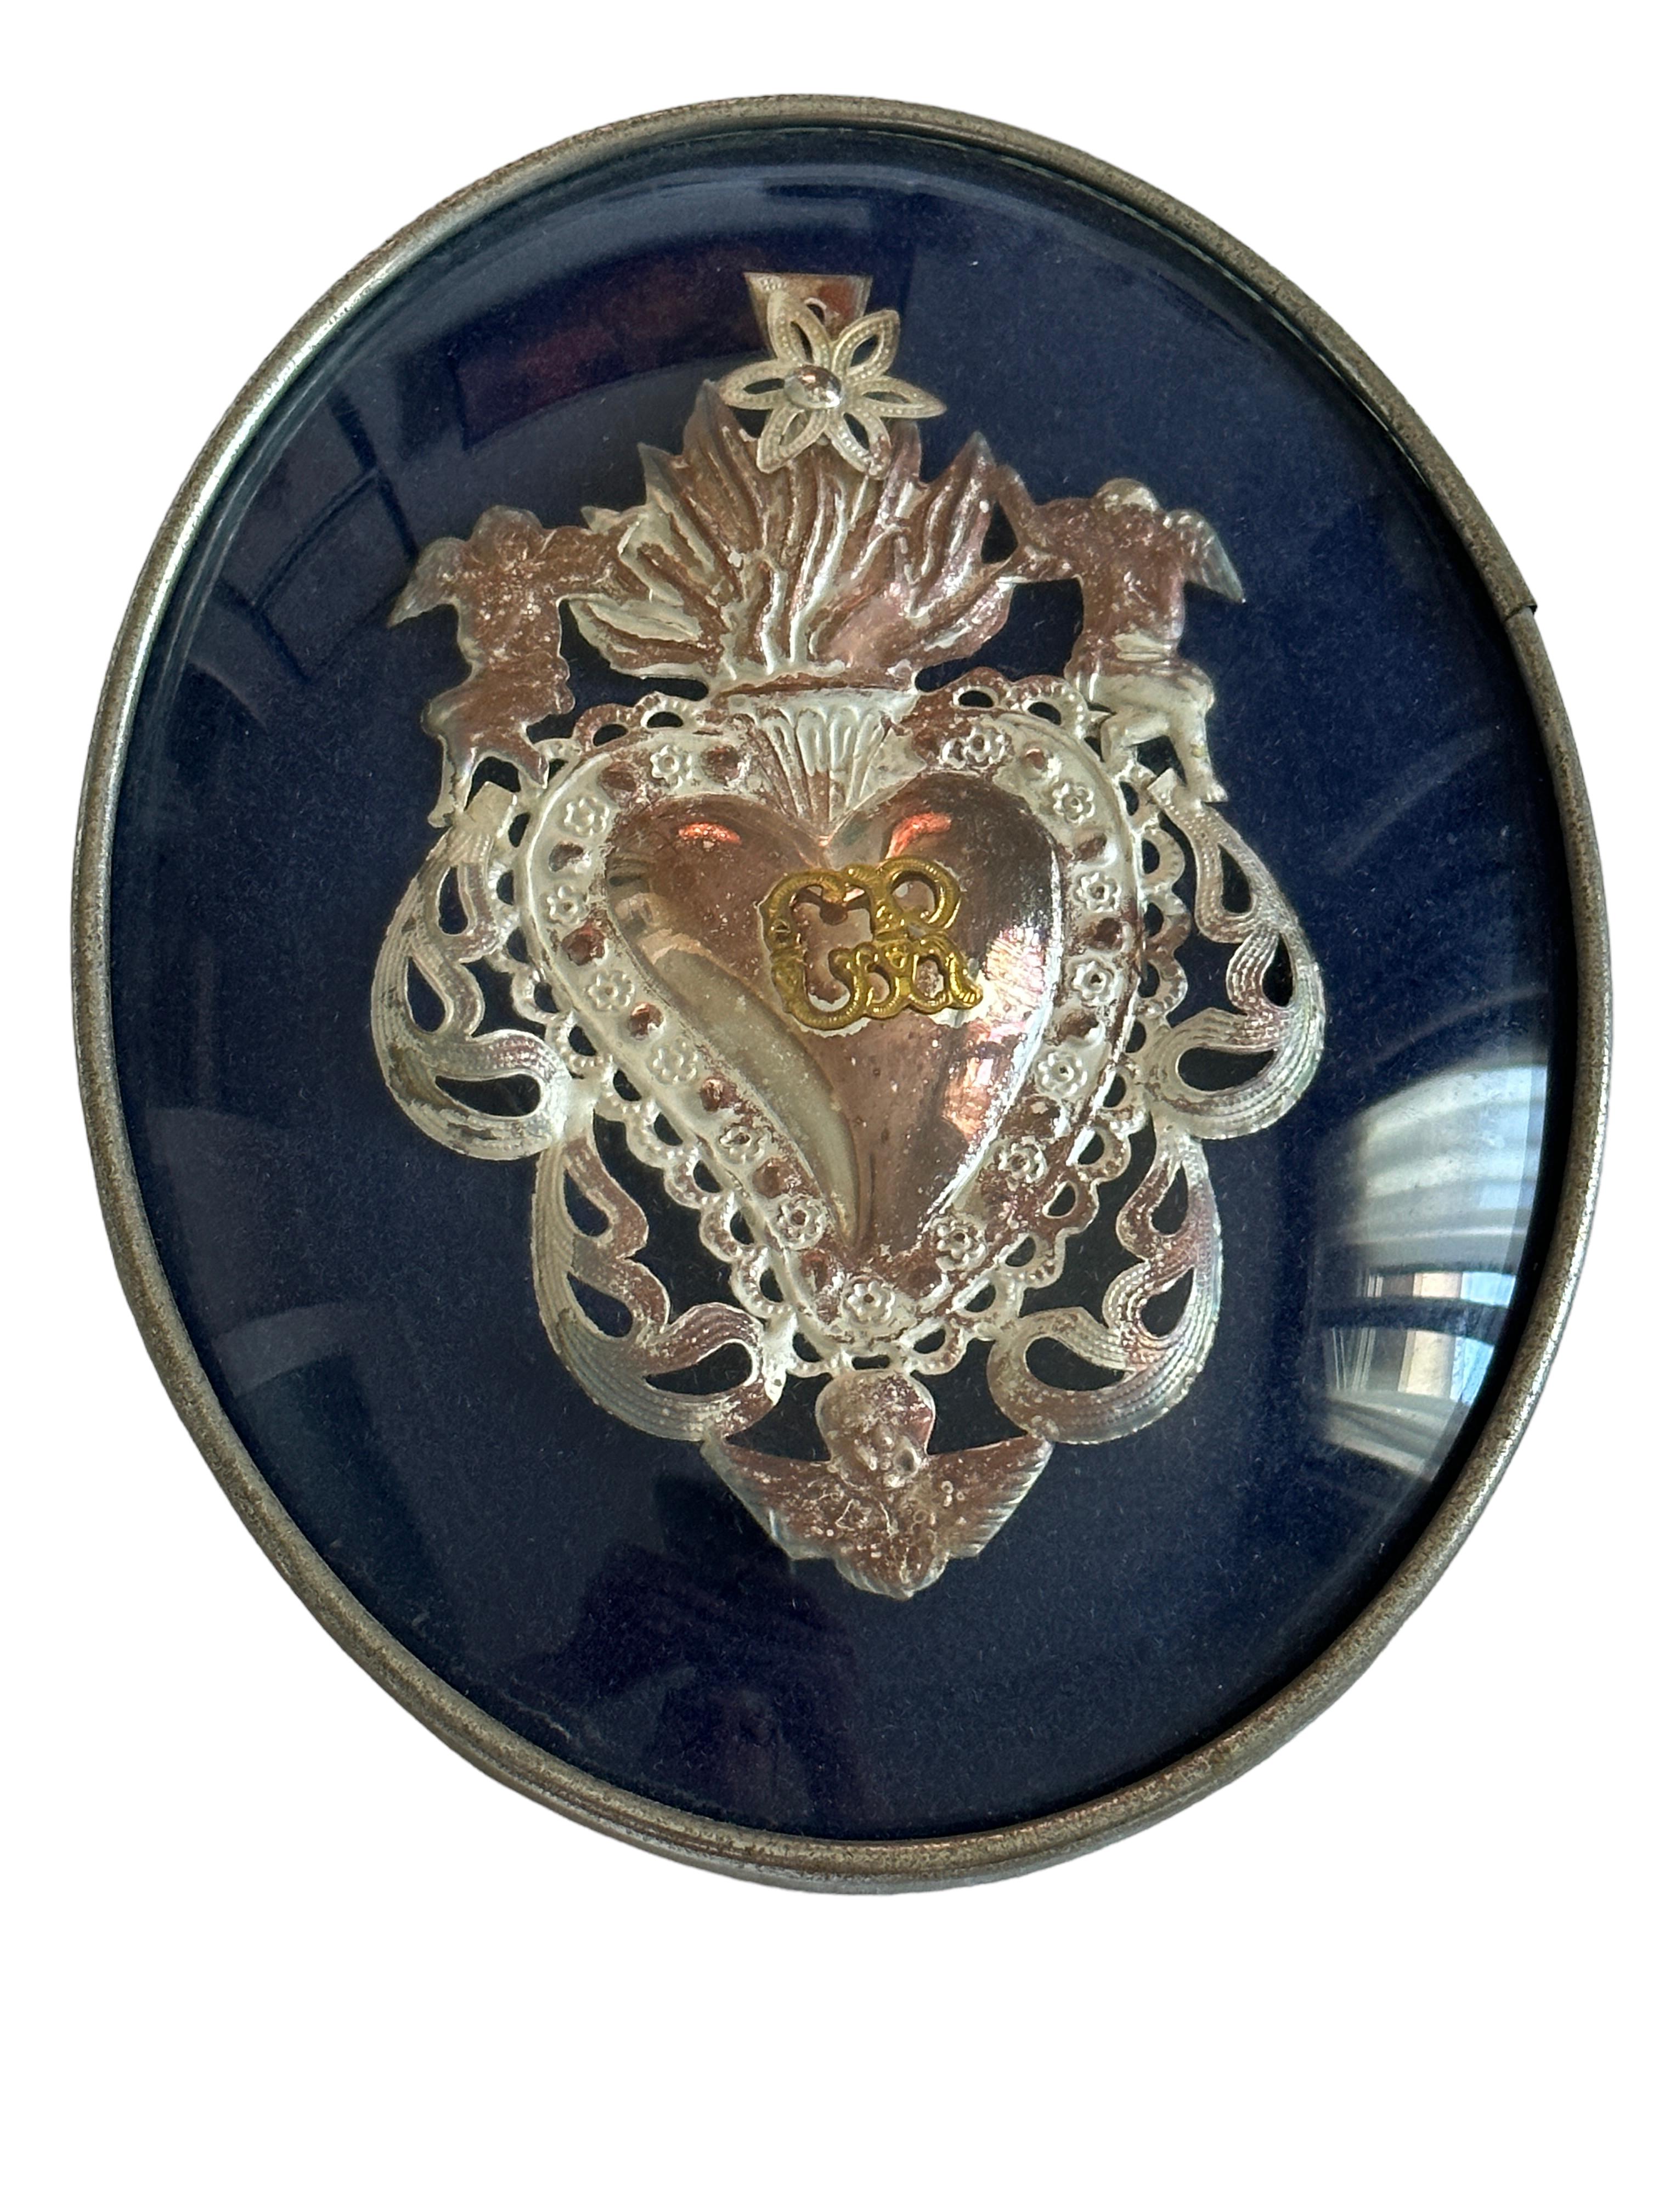 Framed and donated in the 1970s this antique ex voto is a real beautiful collectible. I do not know what it is made of, thin and light filigree silver or silver plated metal. It is handmade, embossed and then welded. Given the delicacy, I did not